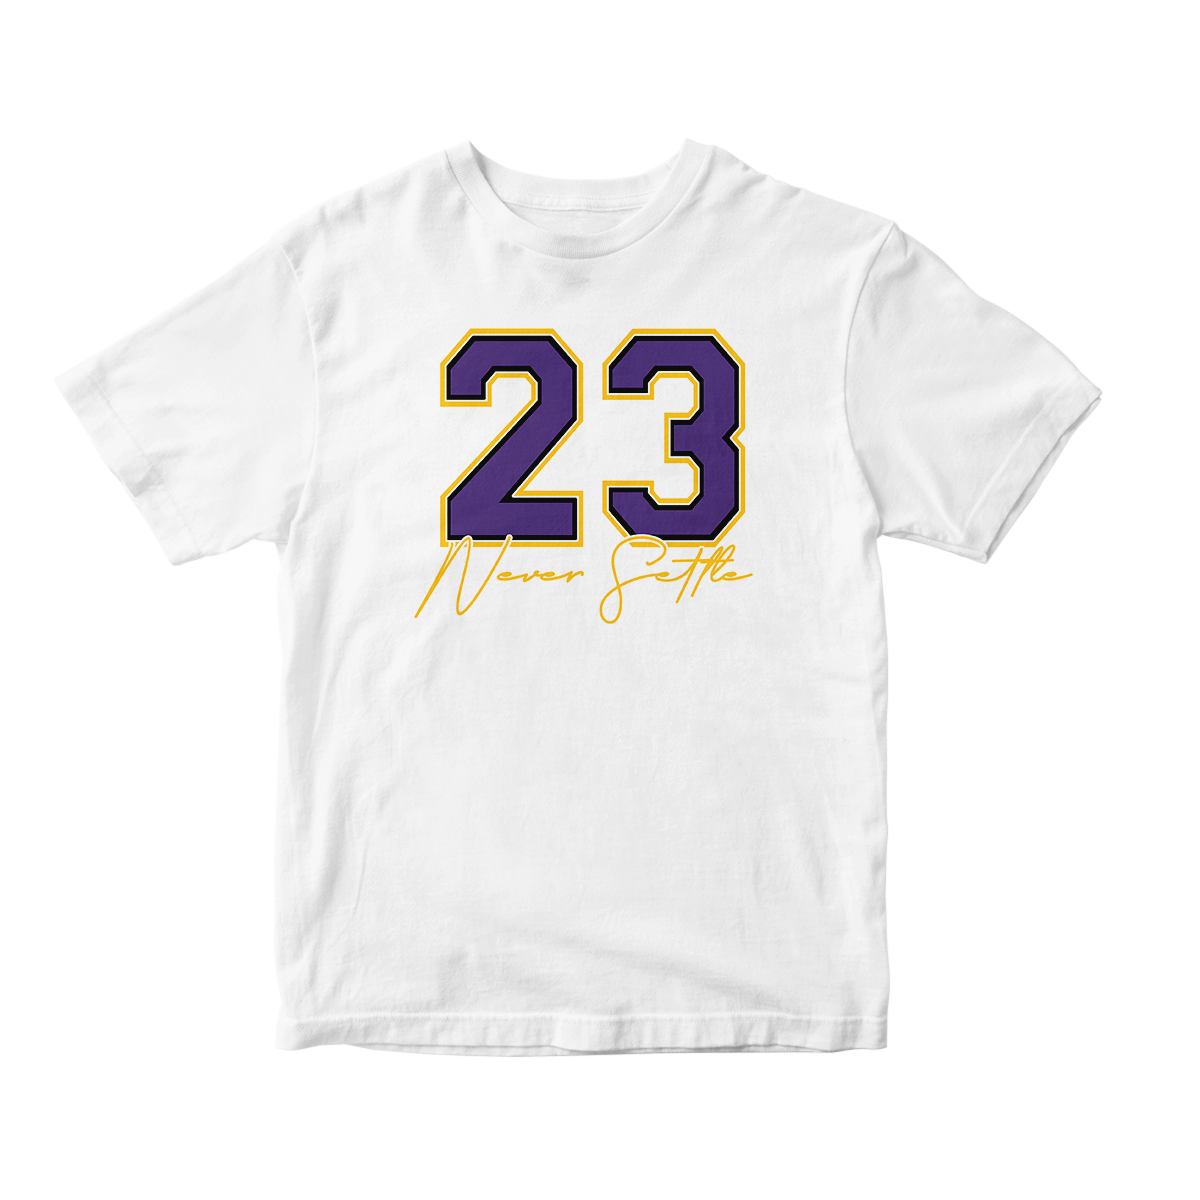 'Never Settle' in Lakers CW Short Sleeve Tee